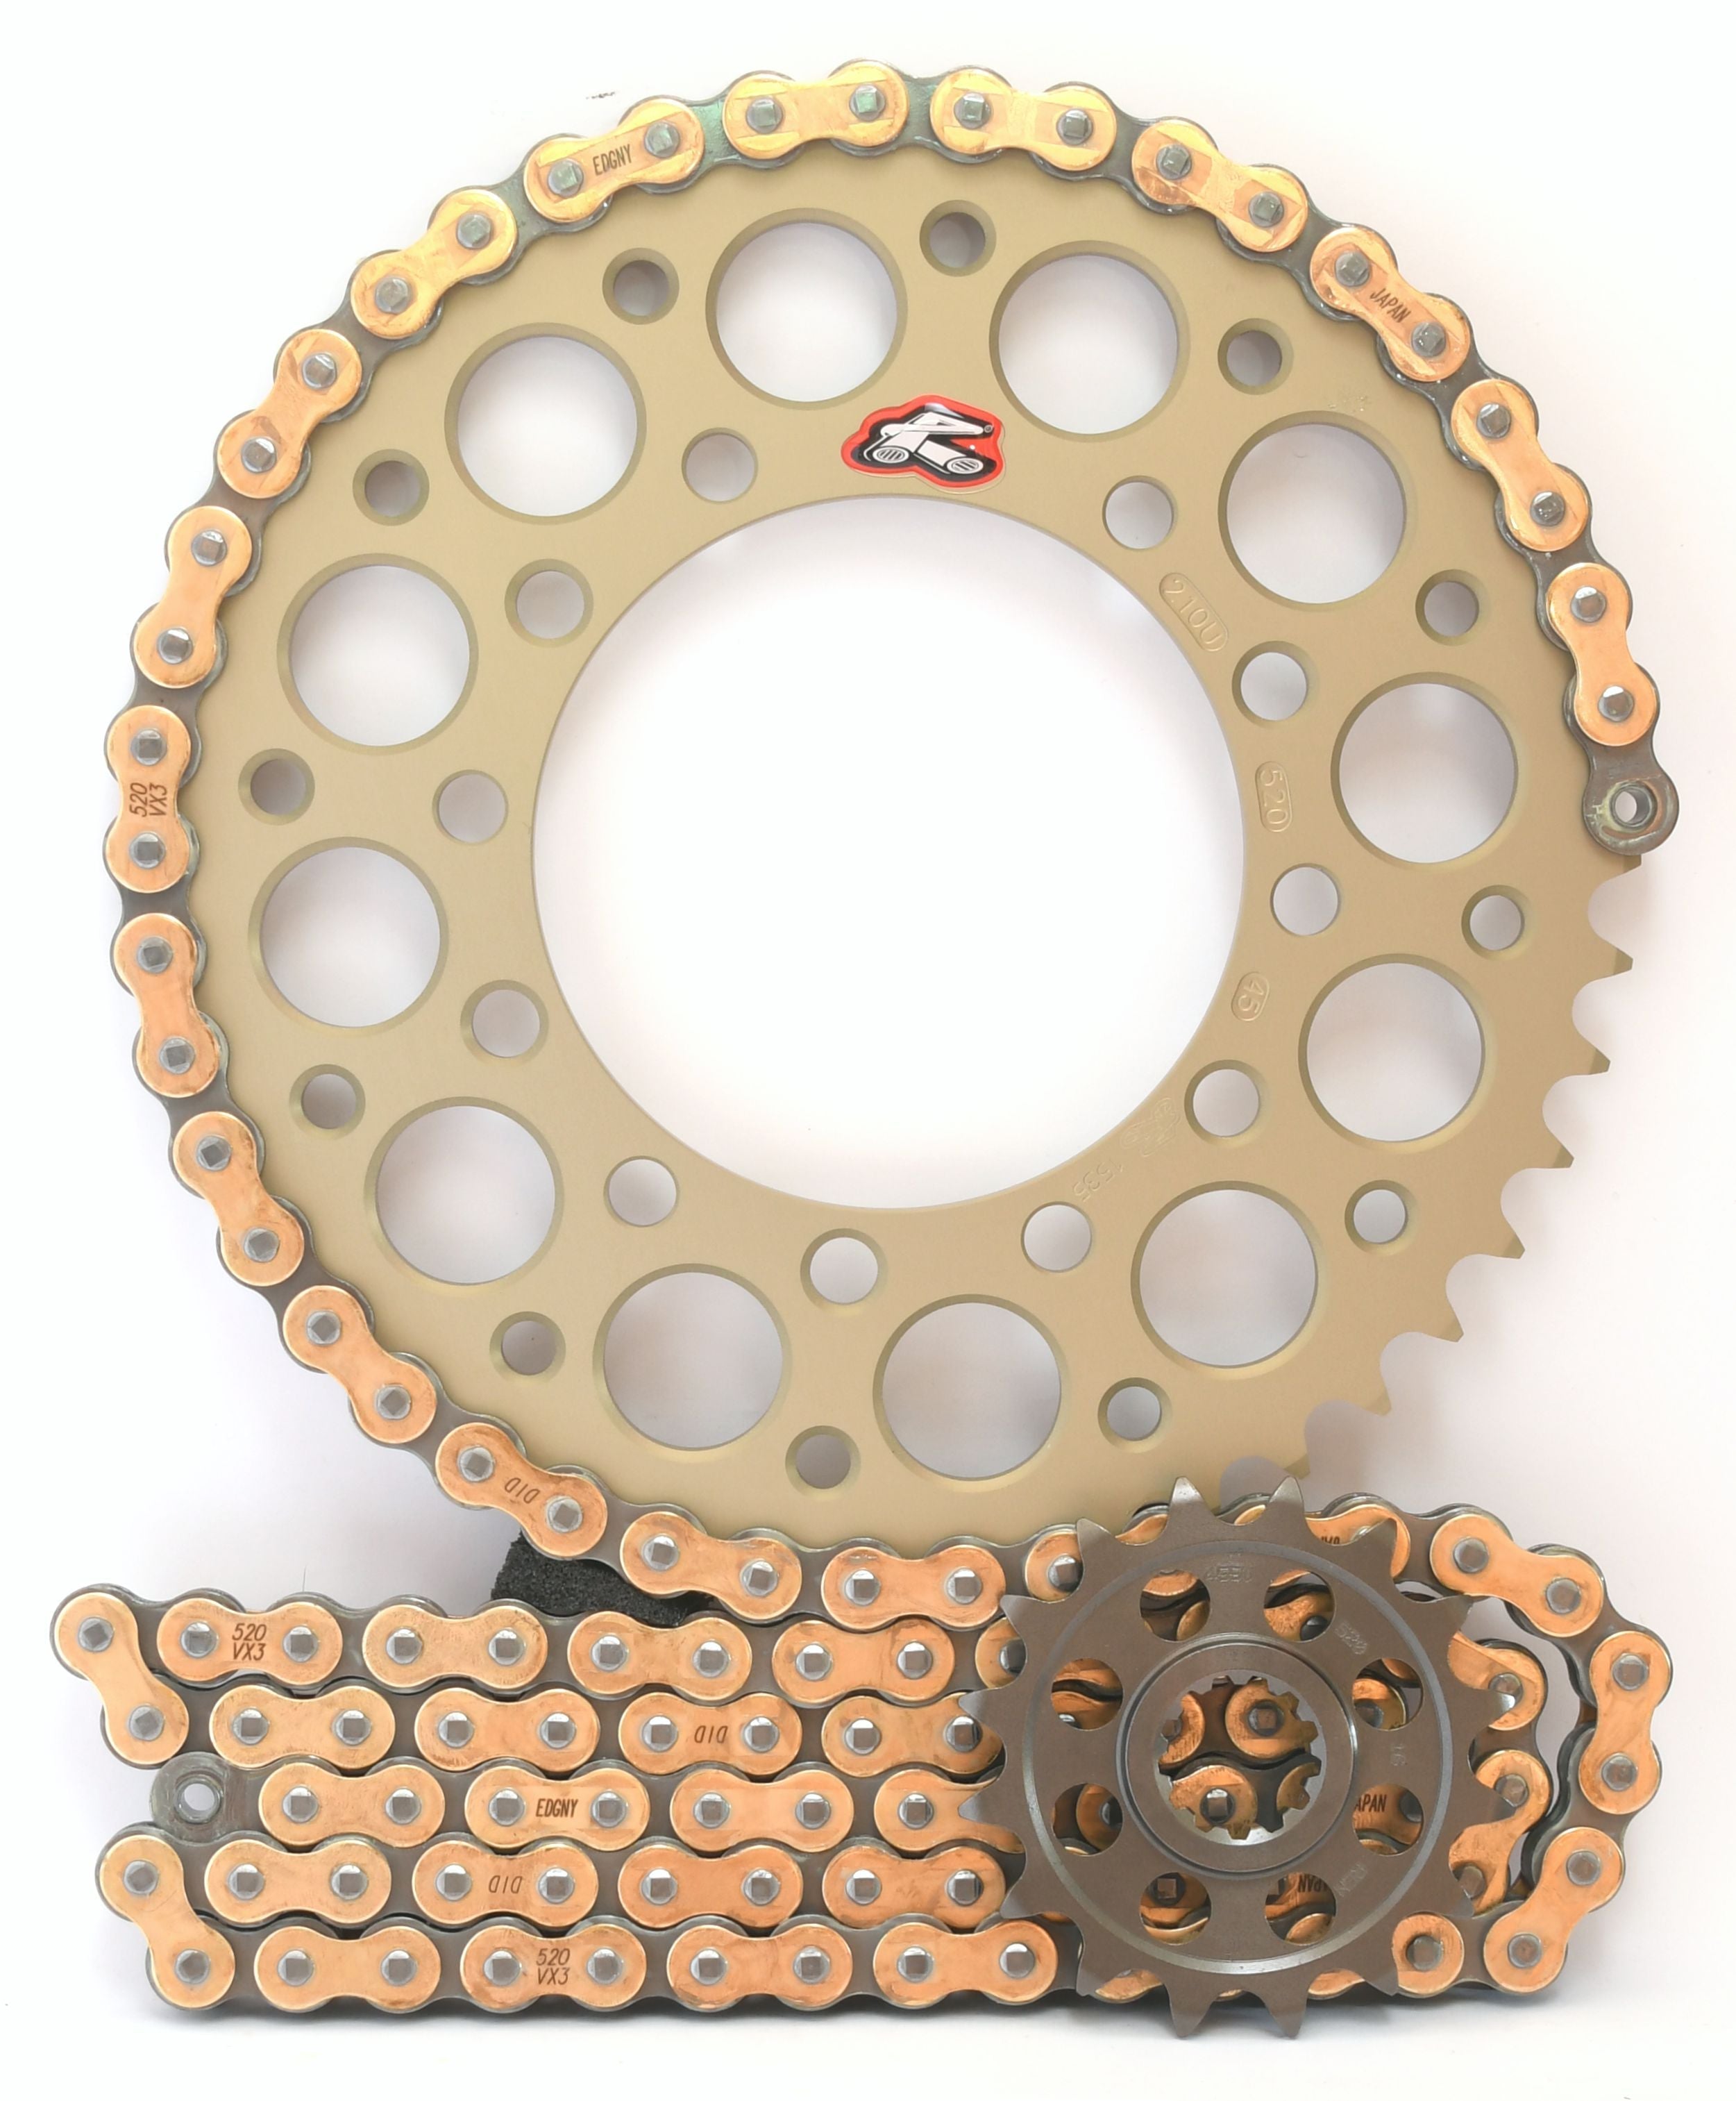 Renthal Ultralight and DID Chain & Sprocket Kit 520 Conversion for Kawasaki ZX6R 1998-2002 - Standard Gearing